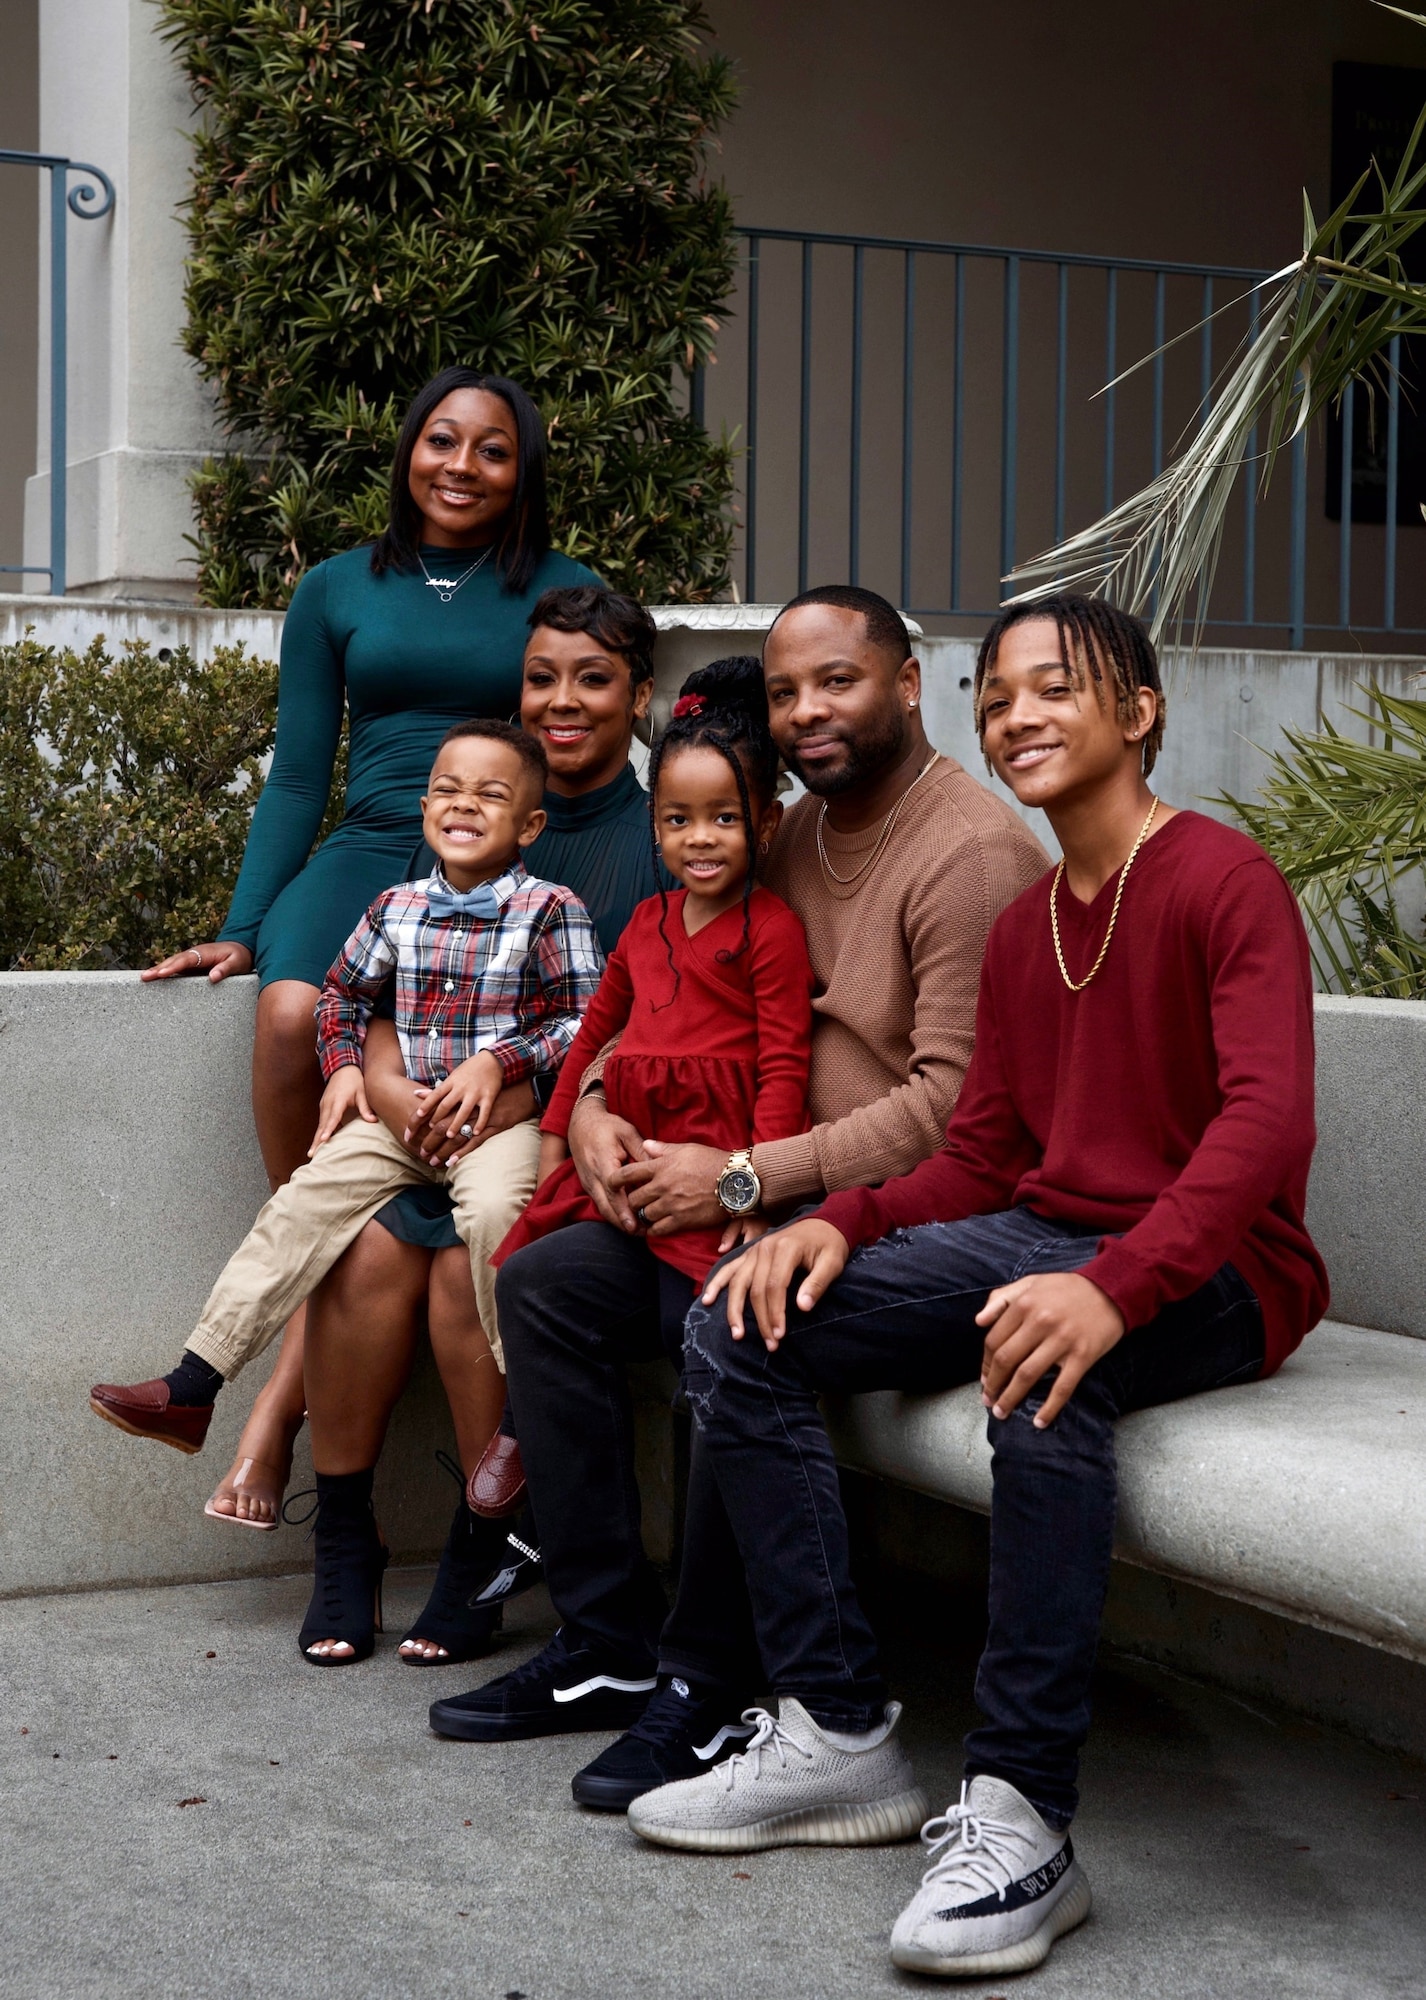 MSgt NeTasha Hutto-Harris and spouse James Harris pose with their children for holiday photos in December 2022.